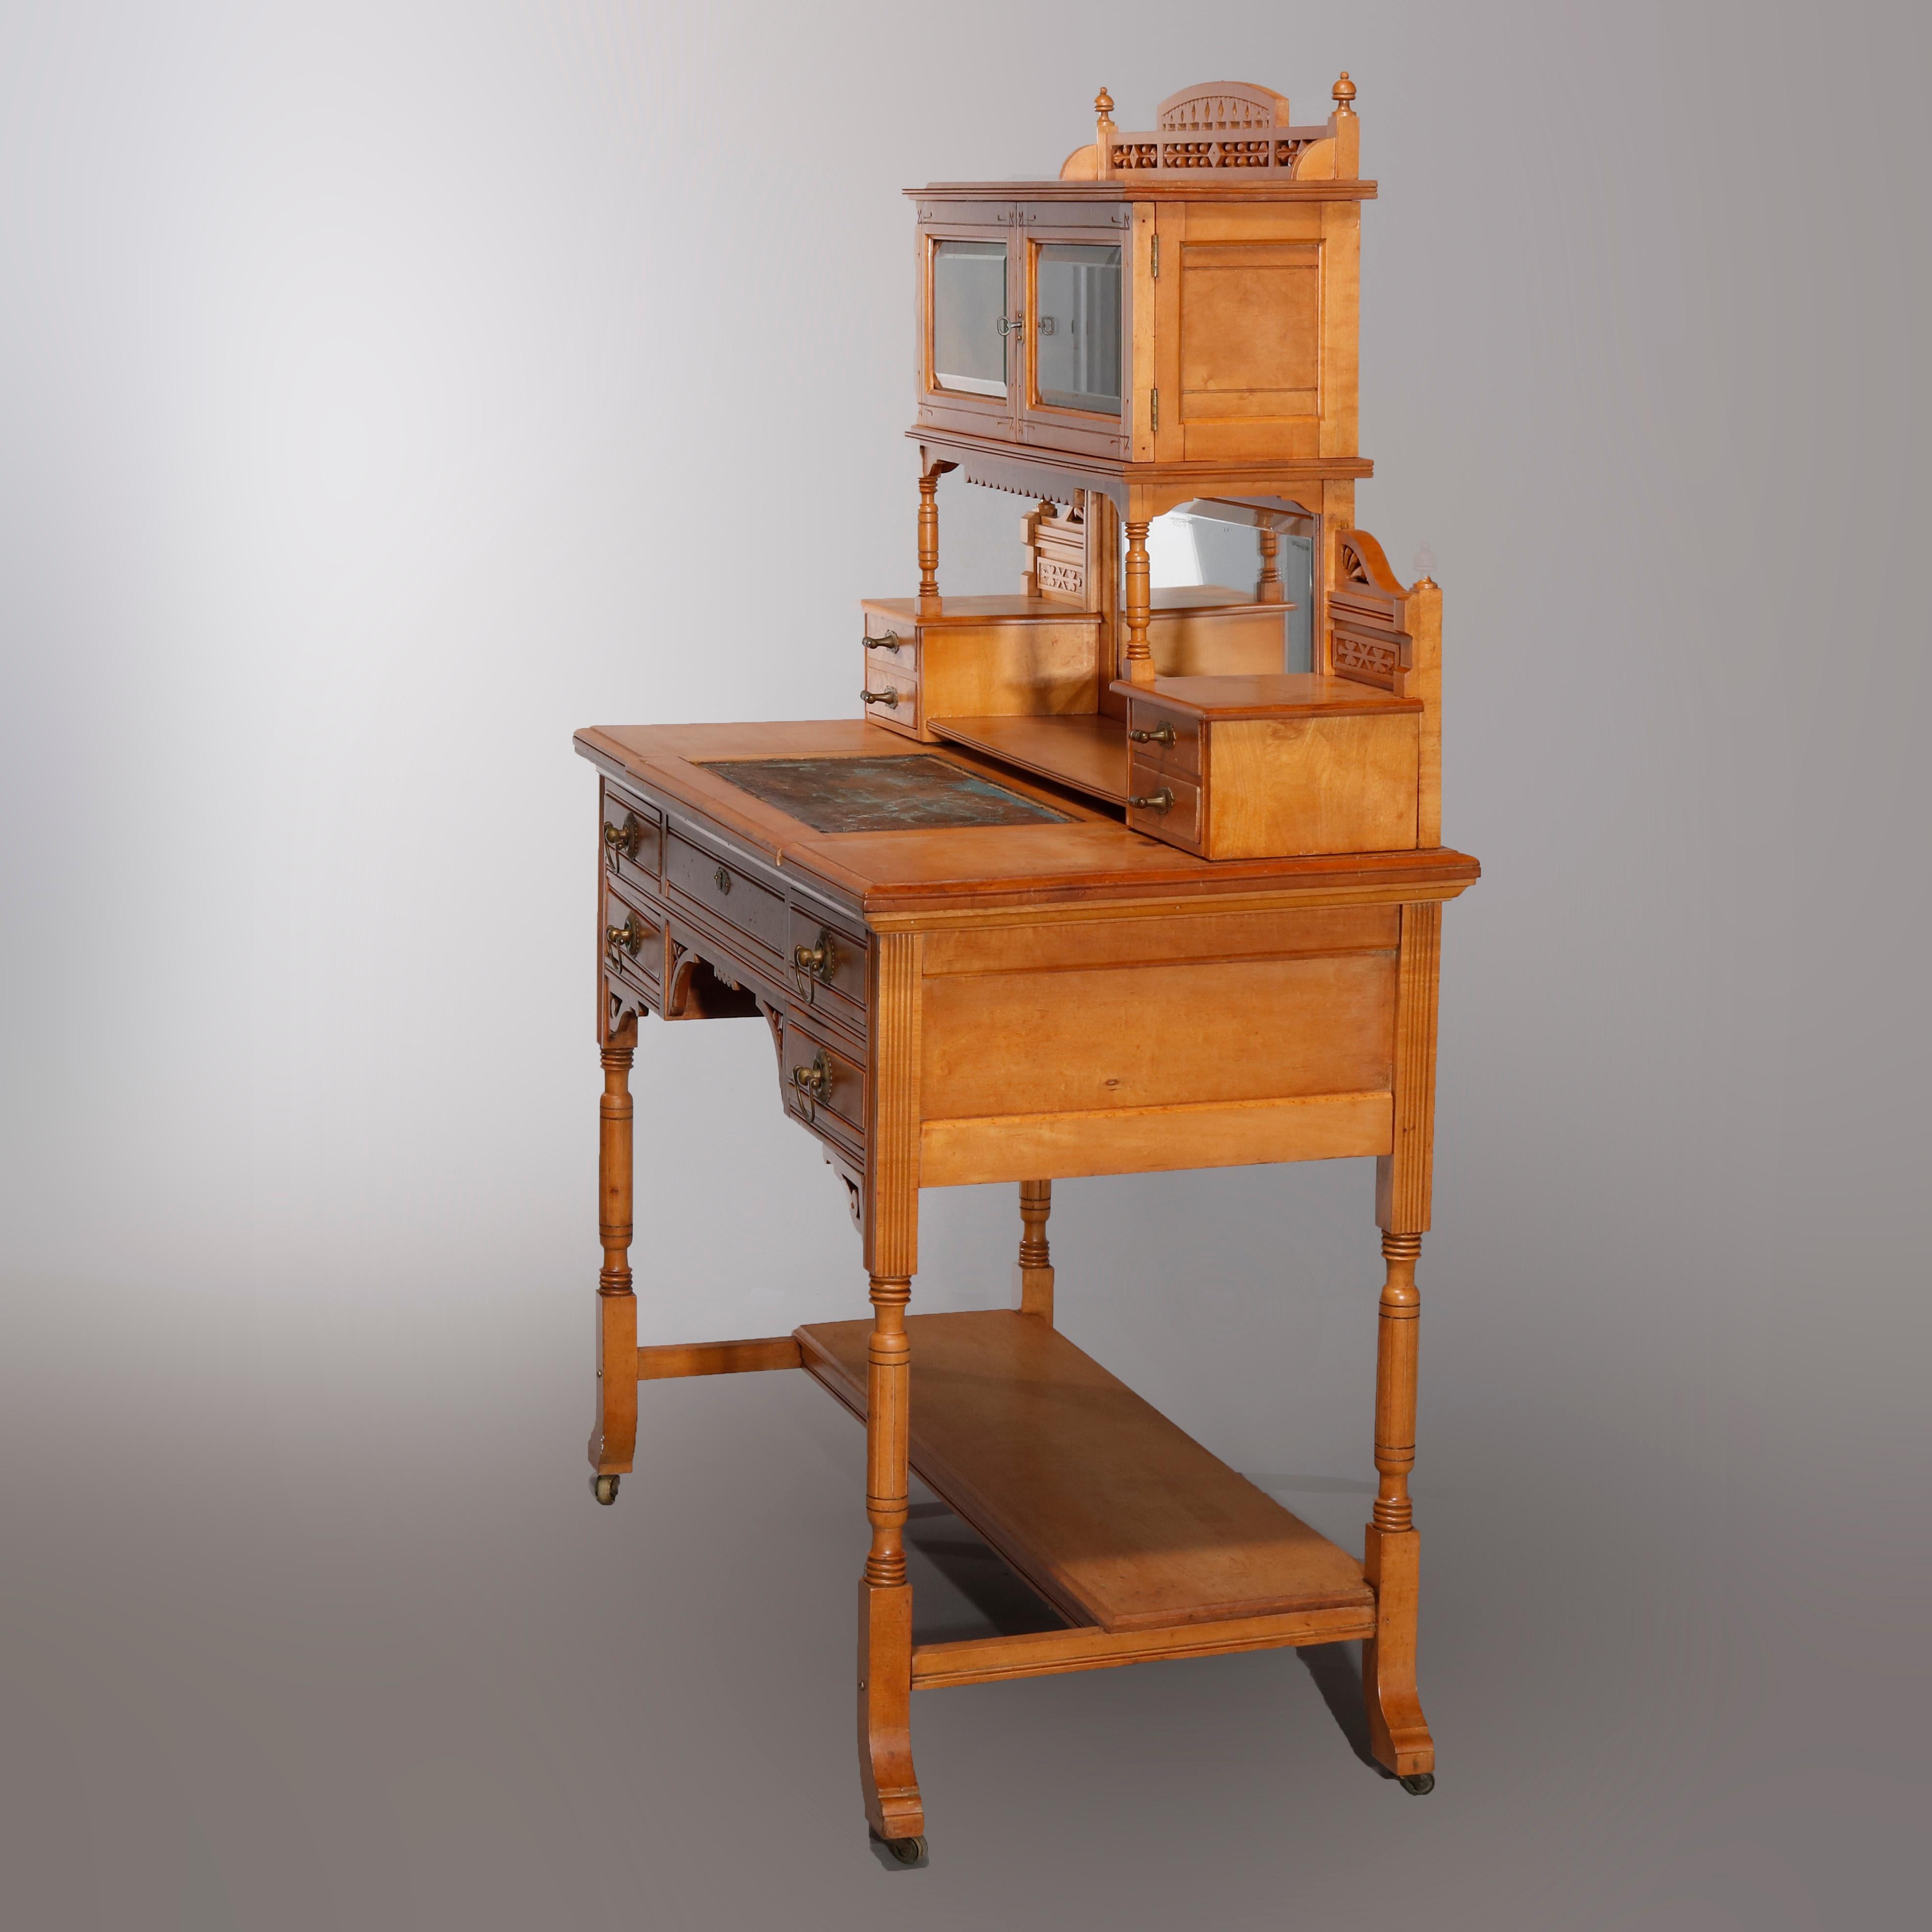 An antique Aesthetic Movement ladies desk in the manner of Kimble & Camus offers birdseye maple construction with upper double glass door cabinet having pierced gallery over mirrored backsplash with flanking small drawers, writing surface is slide